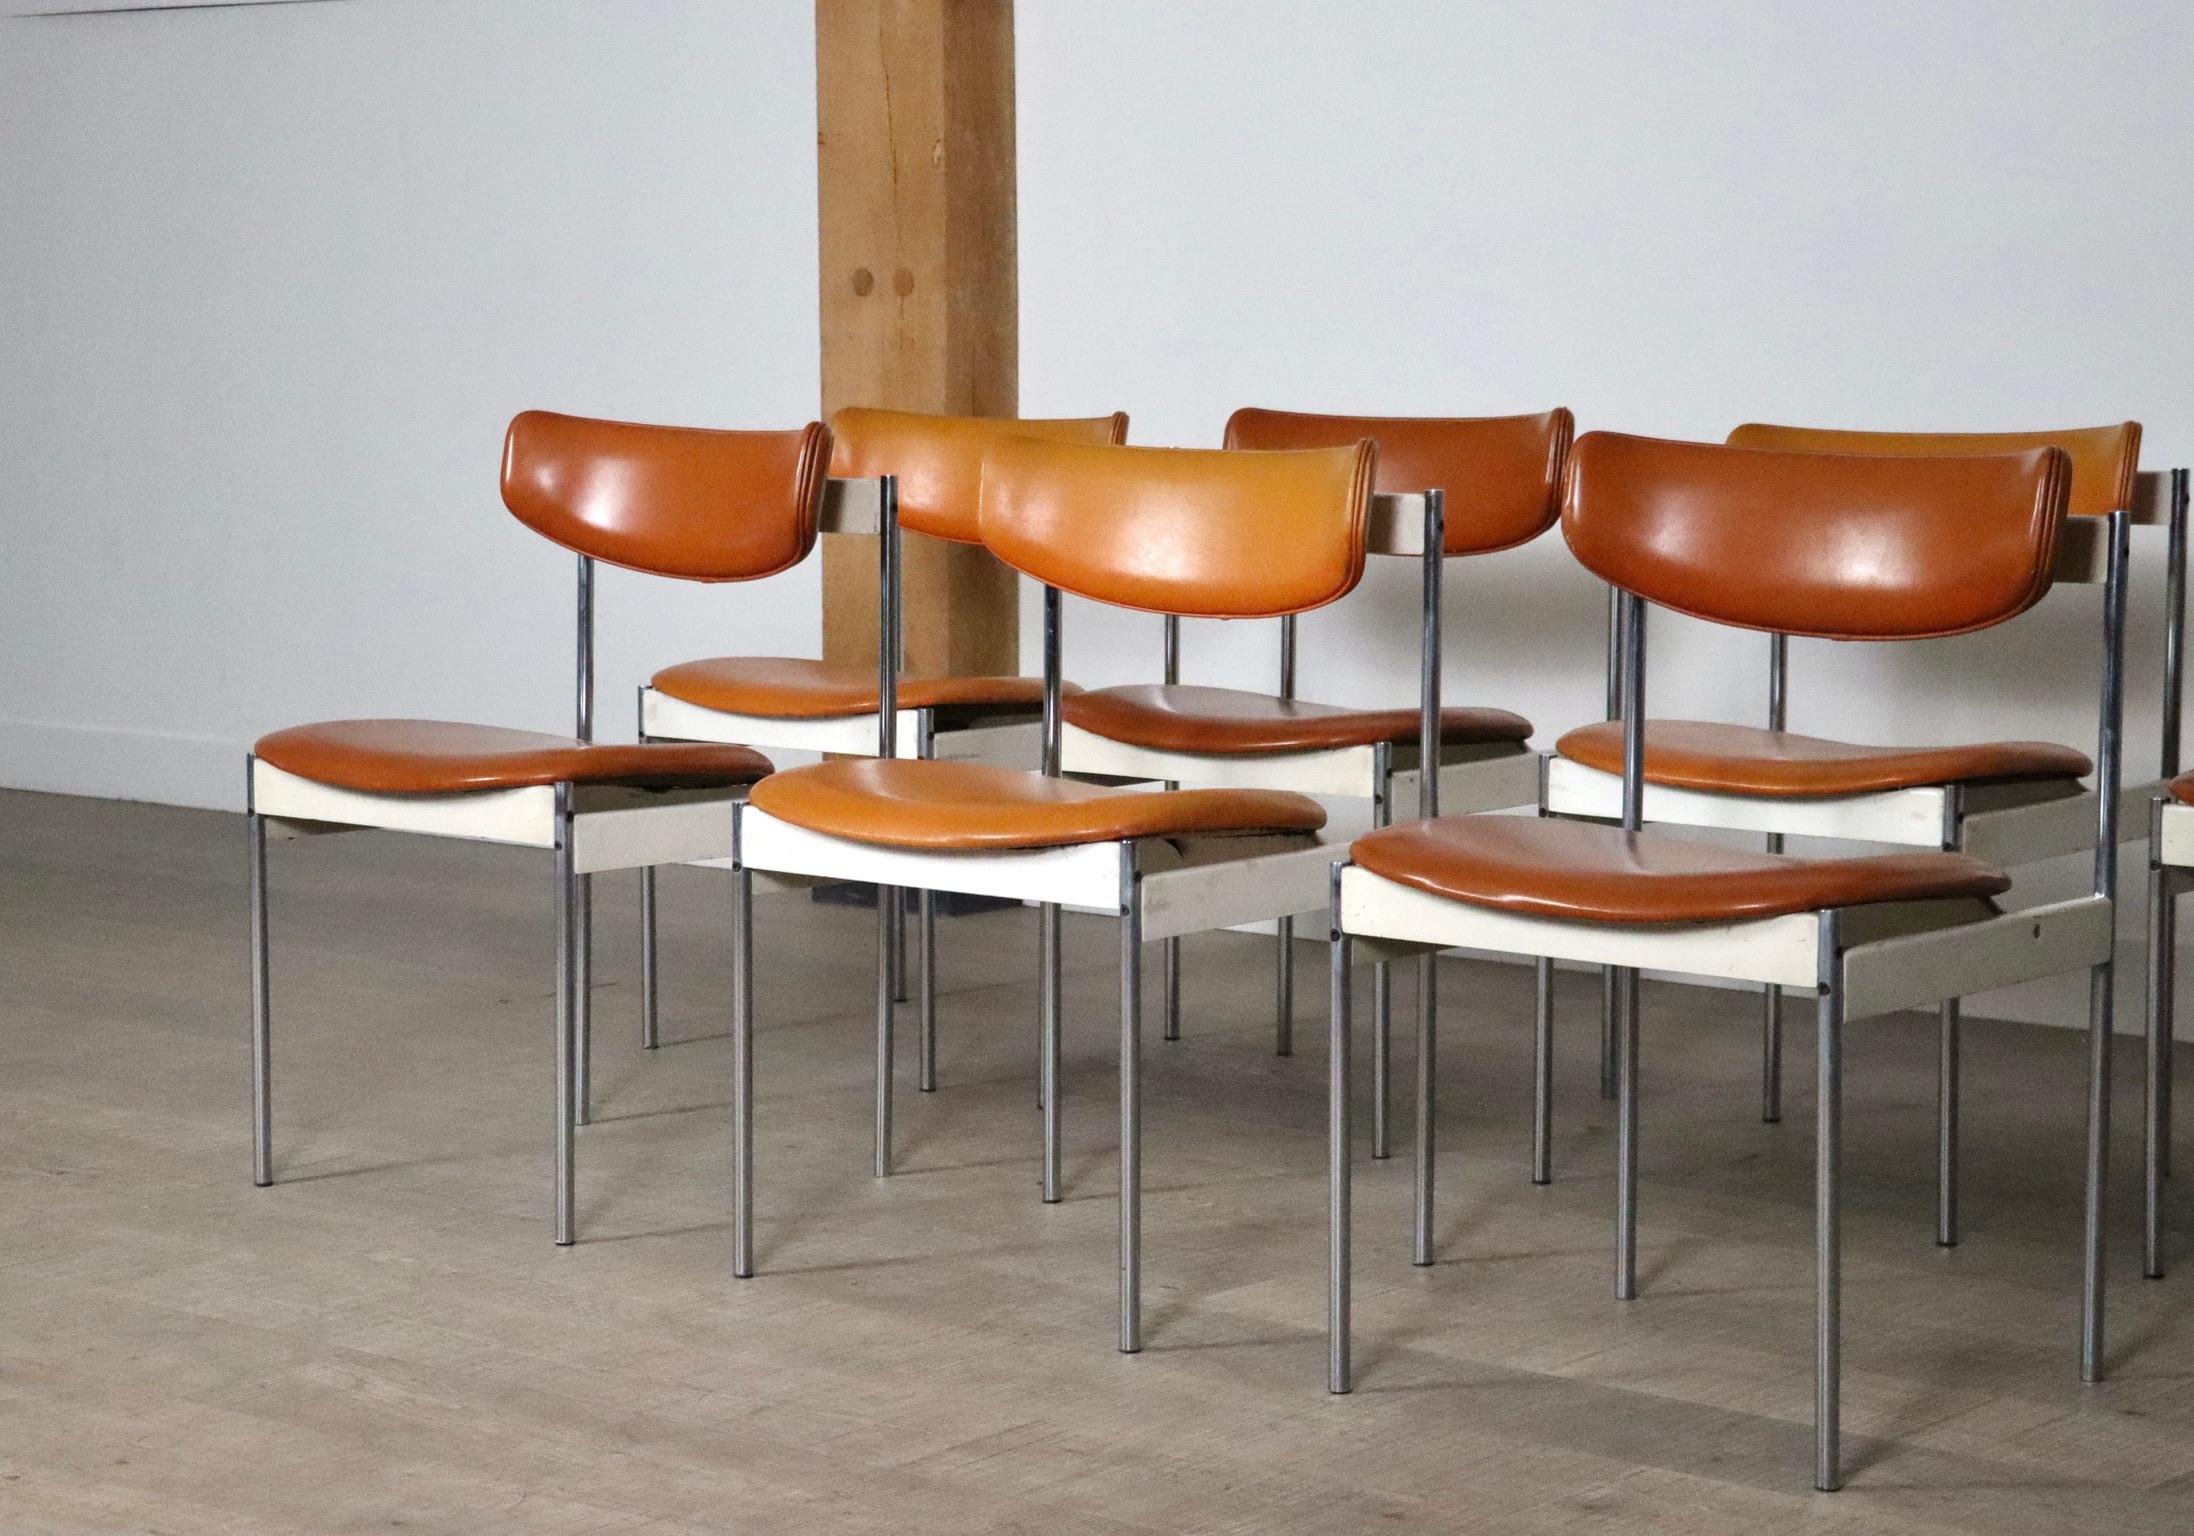 Steel Set of 7 dining chairs by C. Denekamp for Thereca, Netherlands 1960s